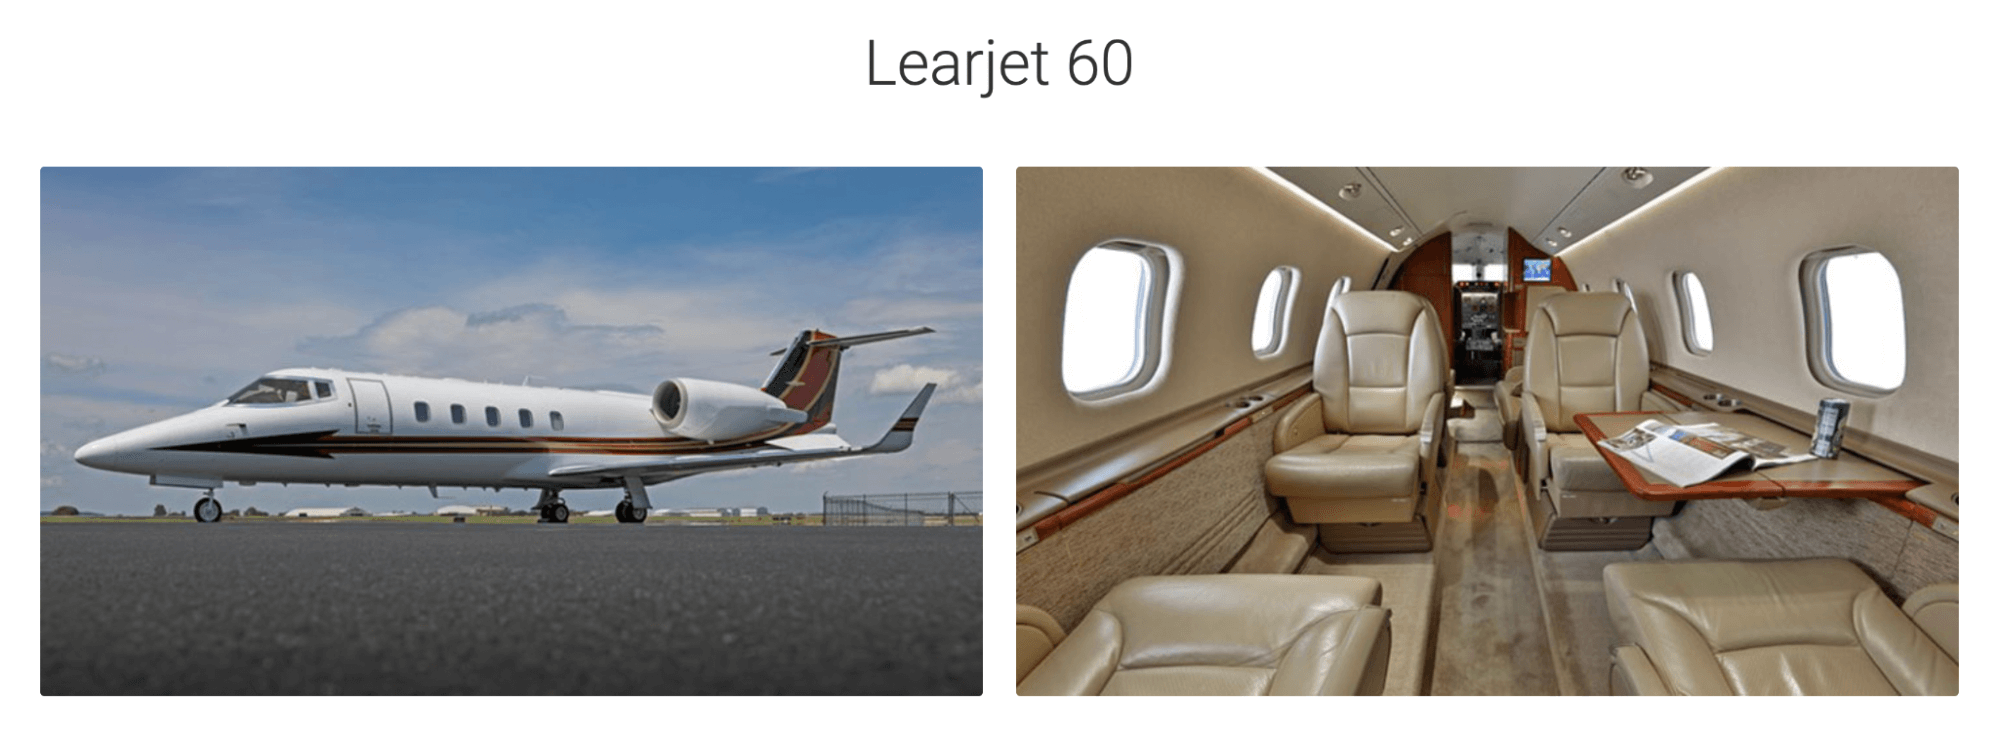 The picture shows the interior and exterior of Learjet 60 jets available from JetOptions.